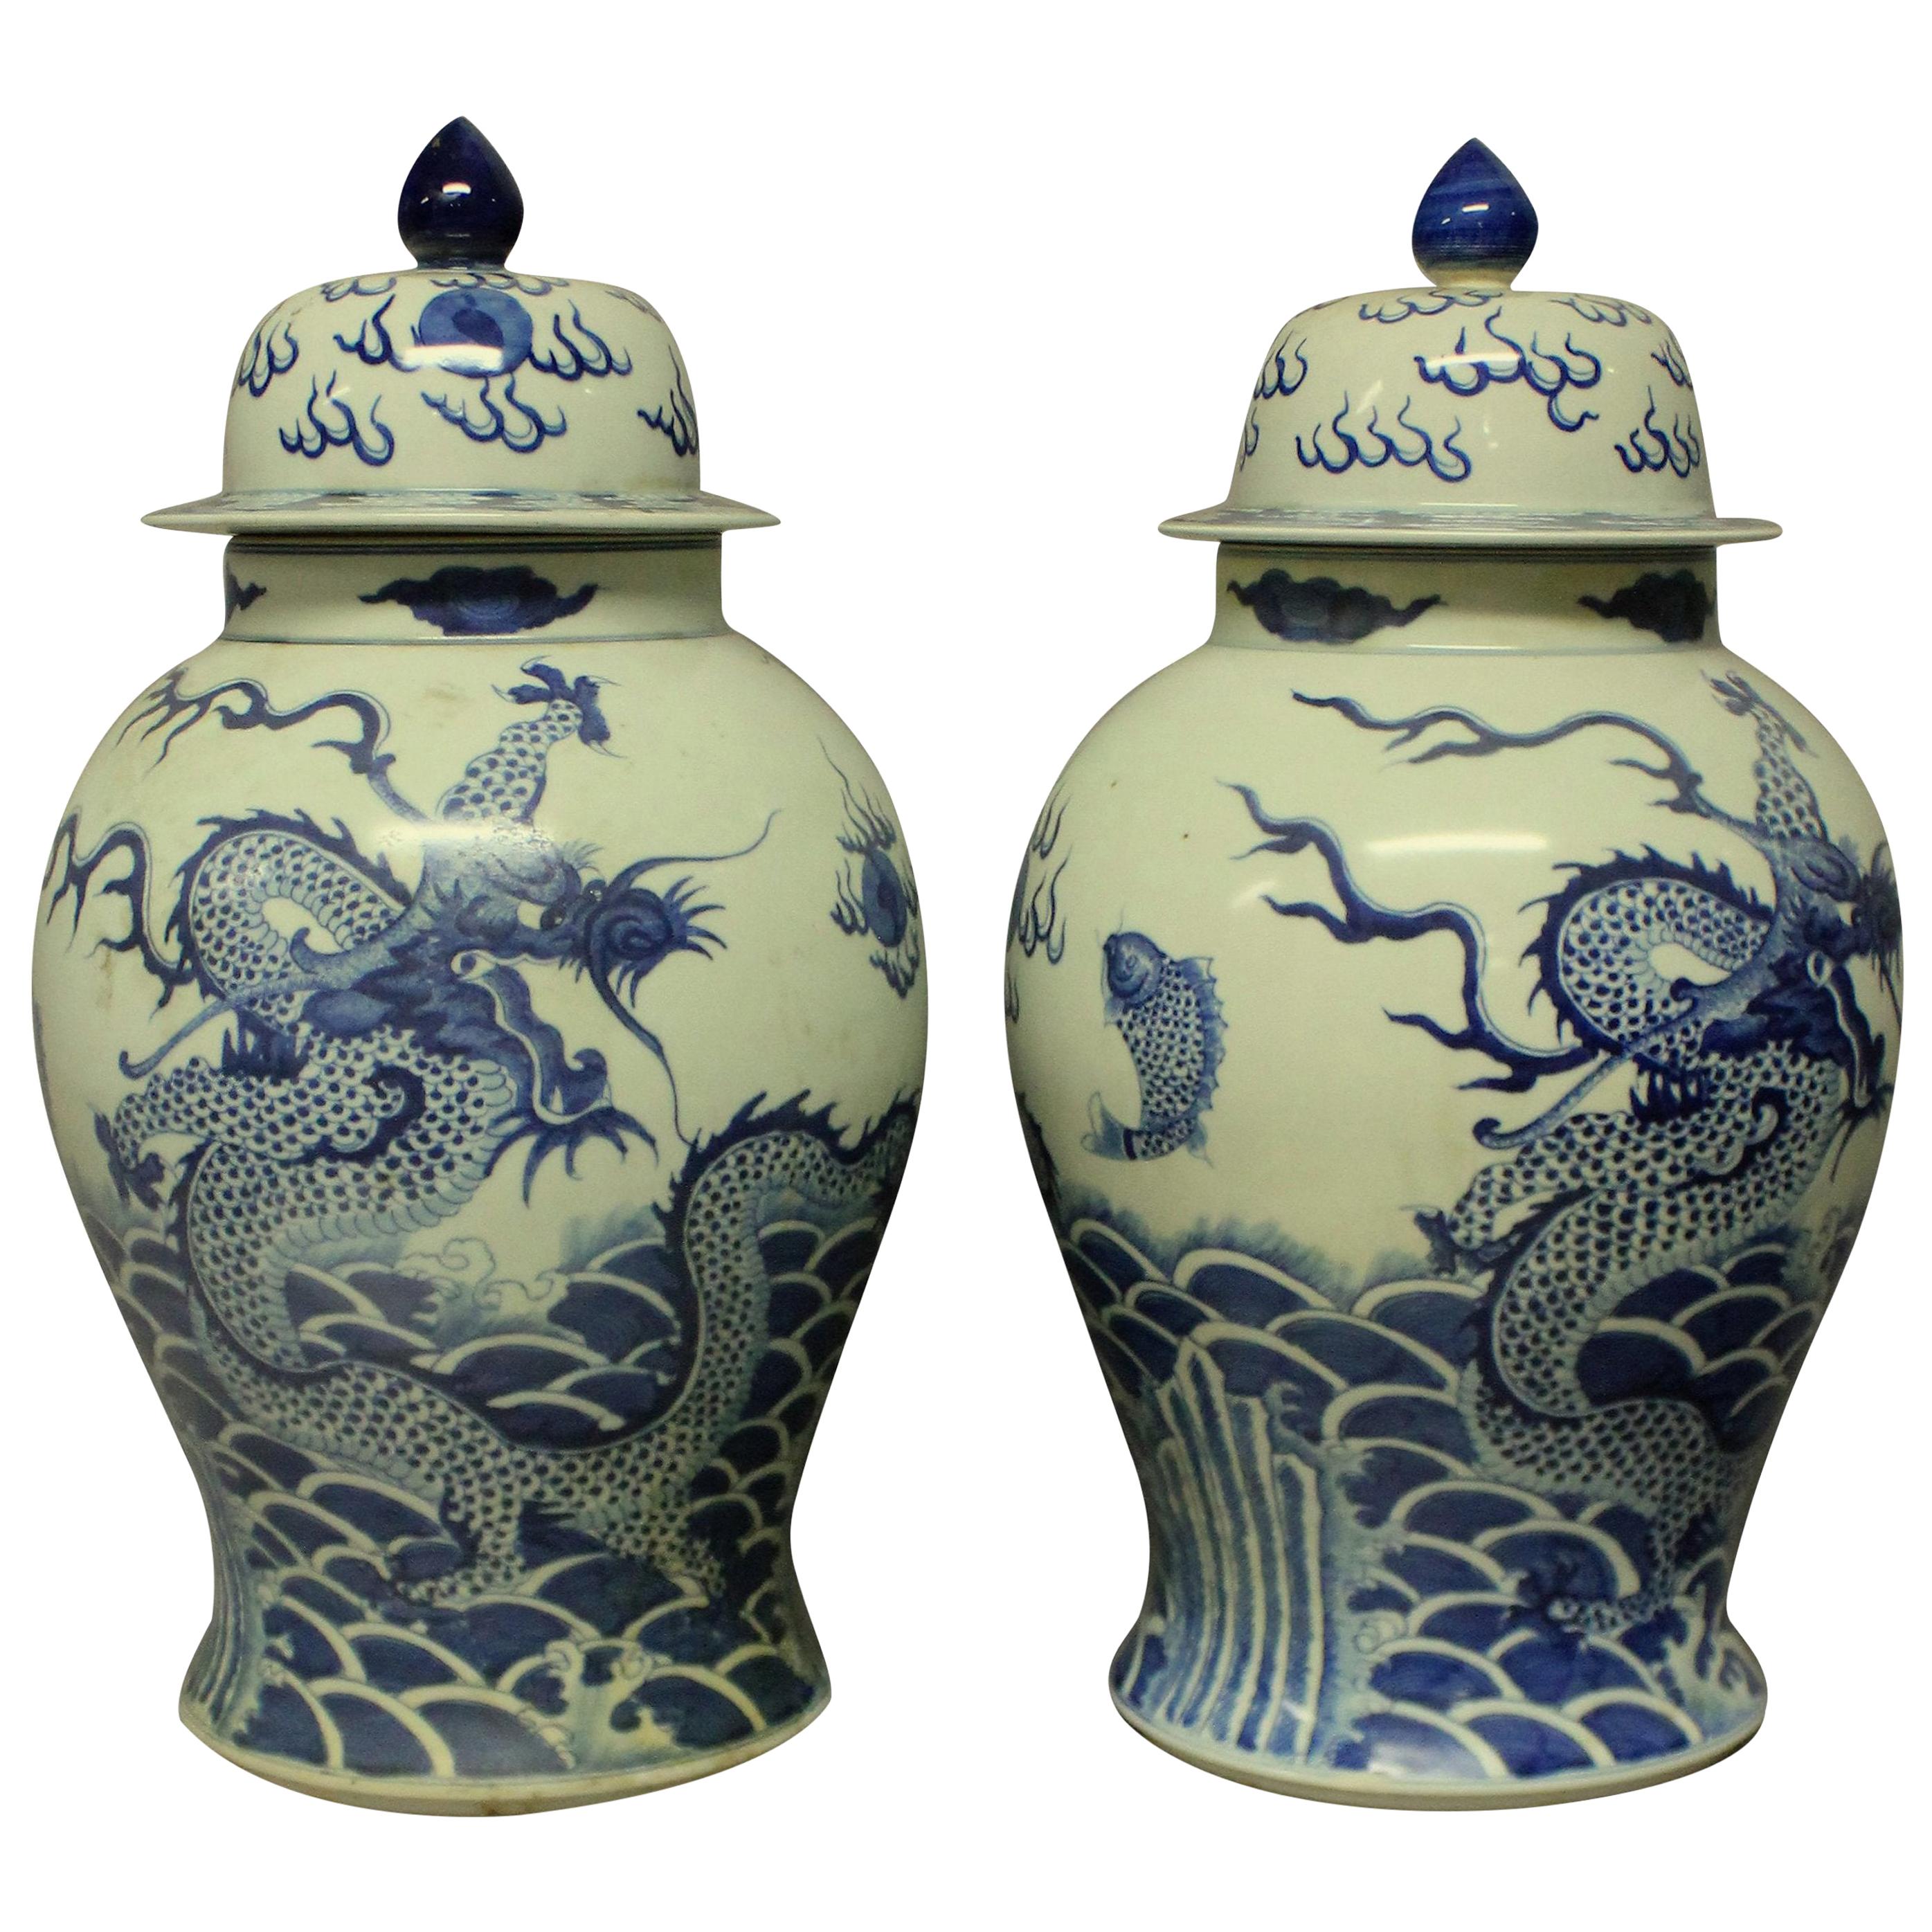 Pair of Large Chinese Vases with Covers